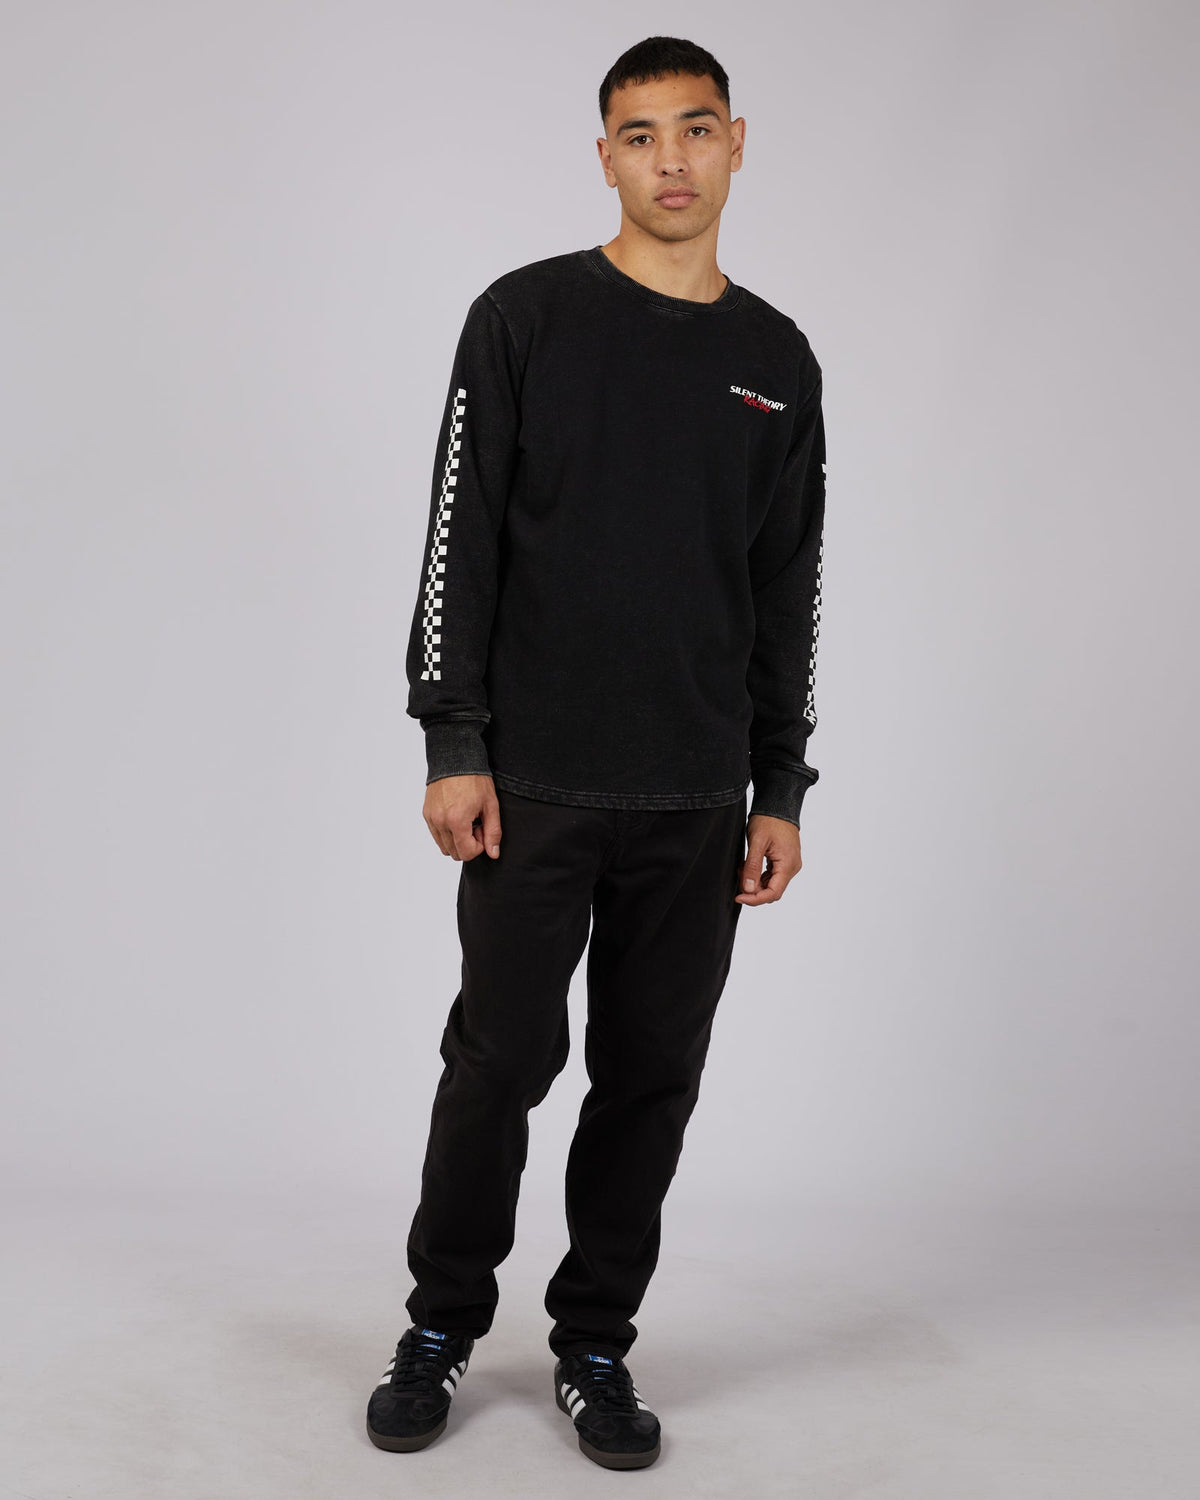 Silent Theory-Limits Scoop Crew Washed Black-Edge Clothing